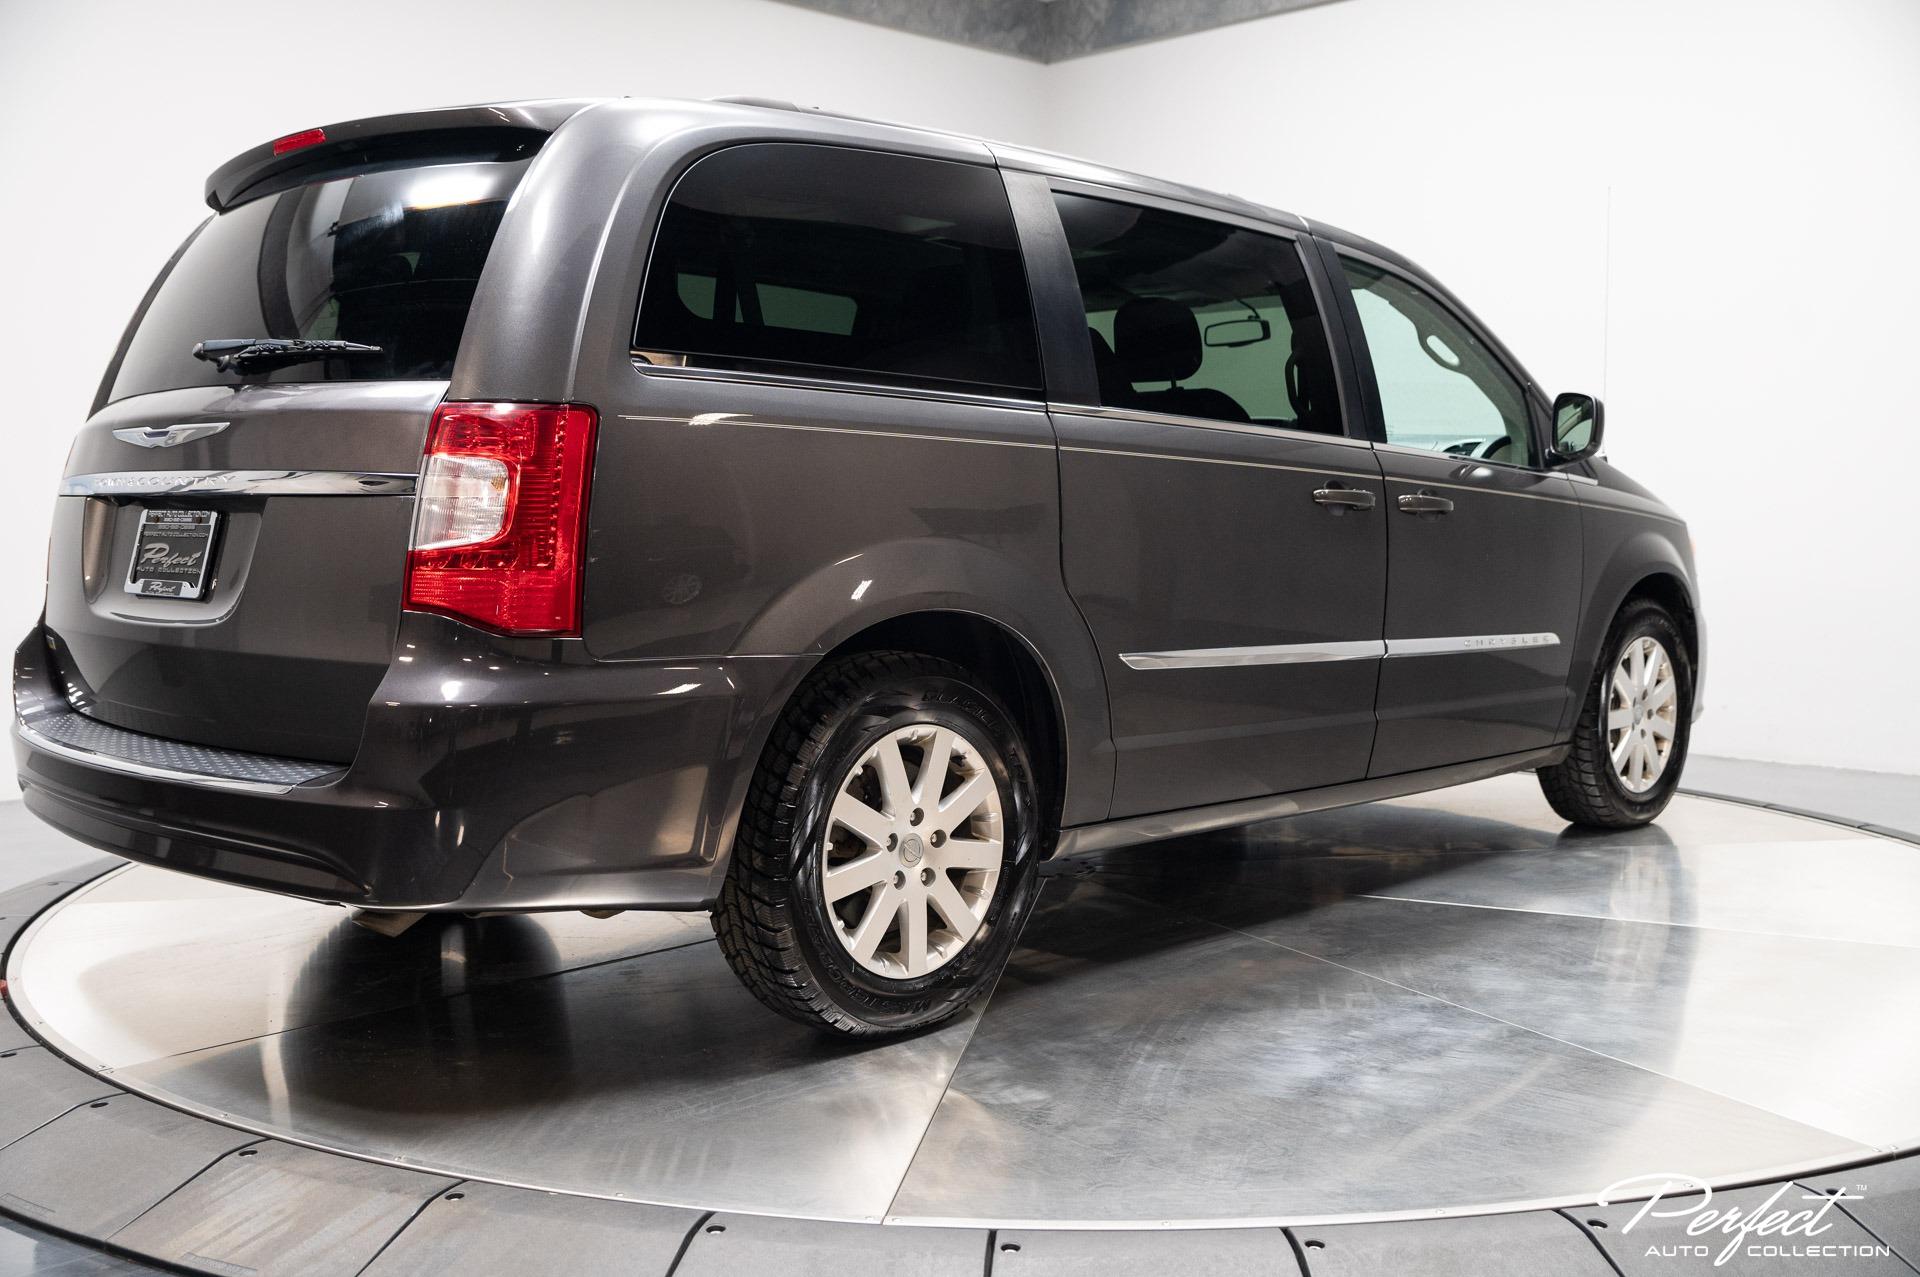 Used 2016 Chrysler Town and Country Touring For Sale ($11,995) | Perfect Auto Collection Stock 2016 Chrysler Town And Country Tire Size